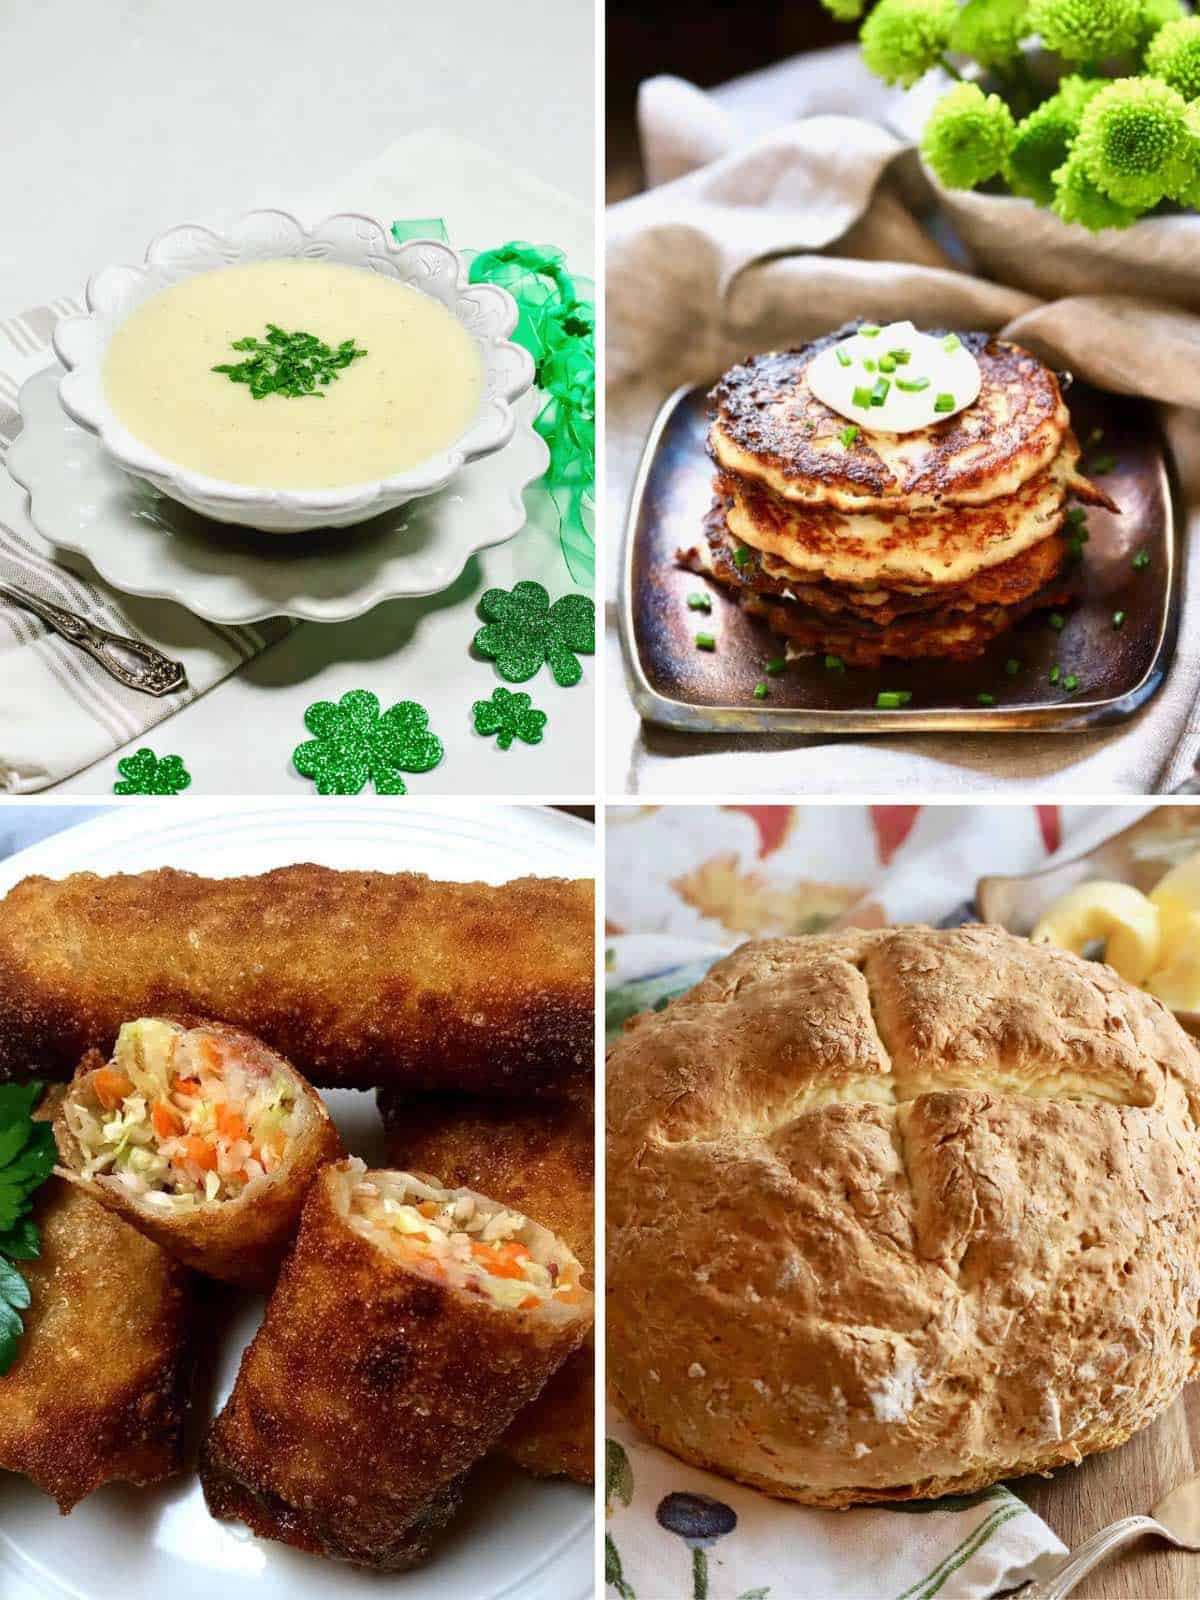 Four traditional Irish dishes for St. Patrick's Day.